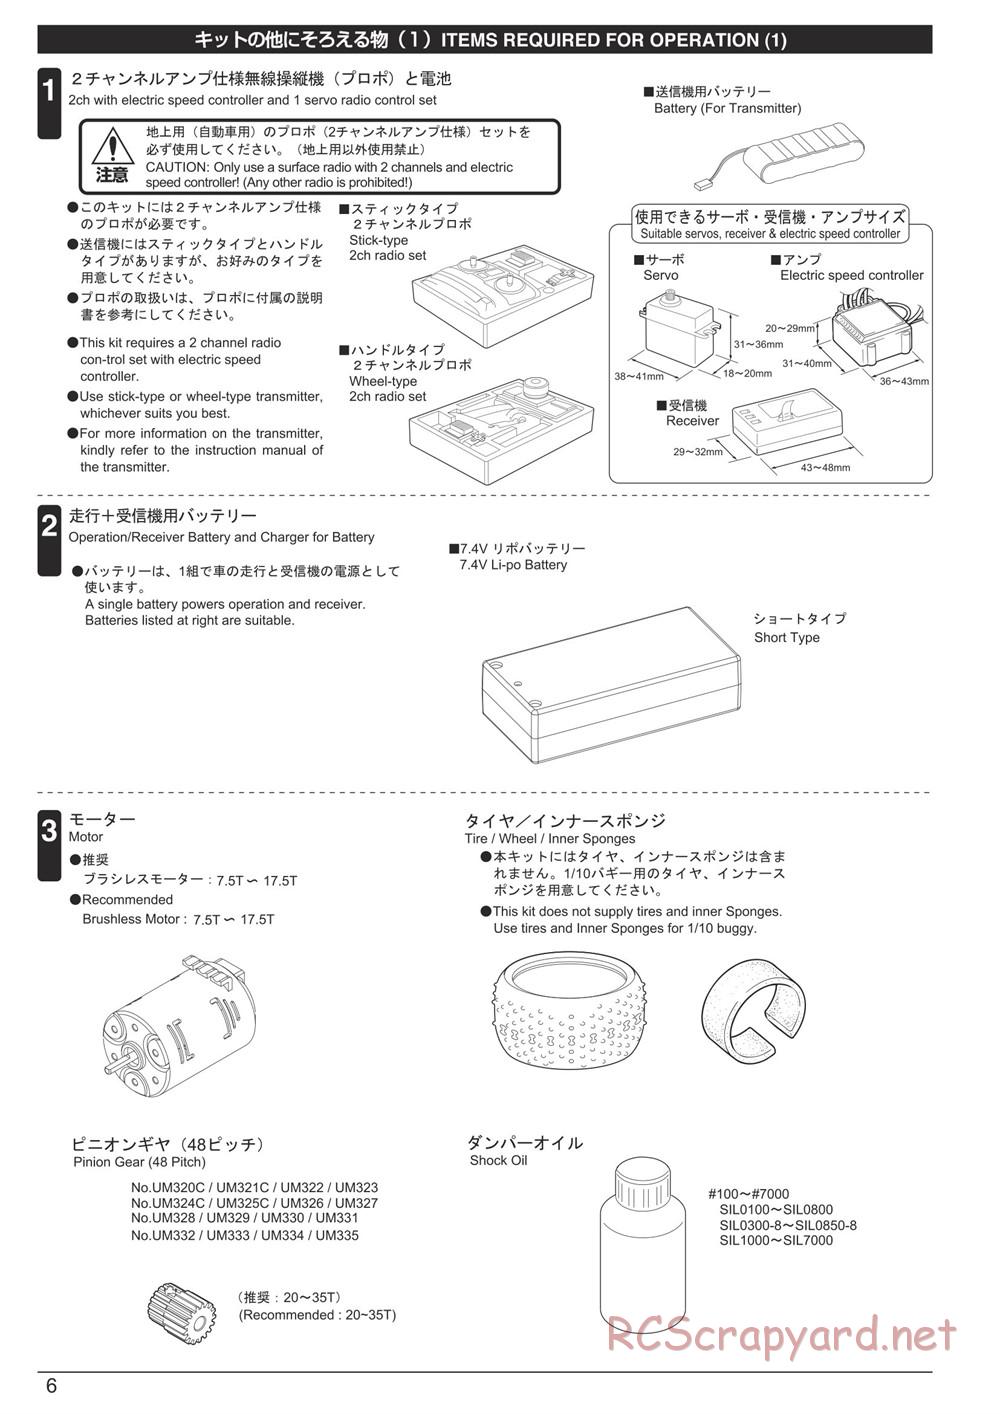 Kyosho - Ultima RB7 - Manual - Page 6